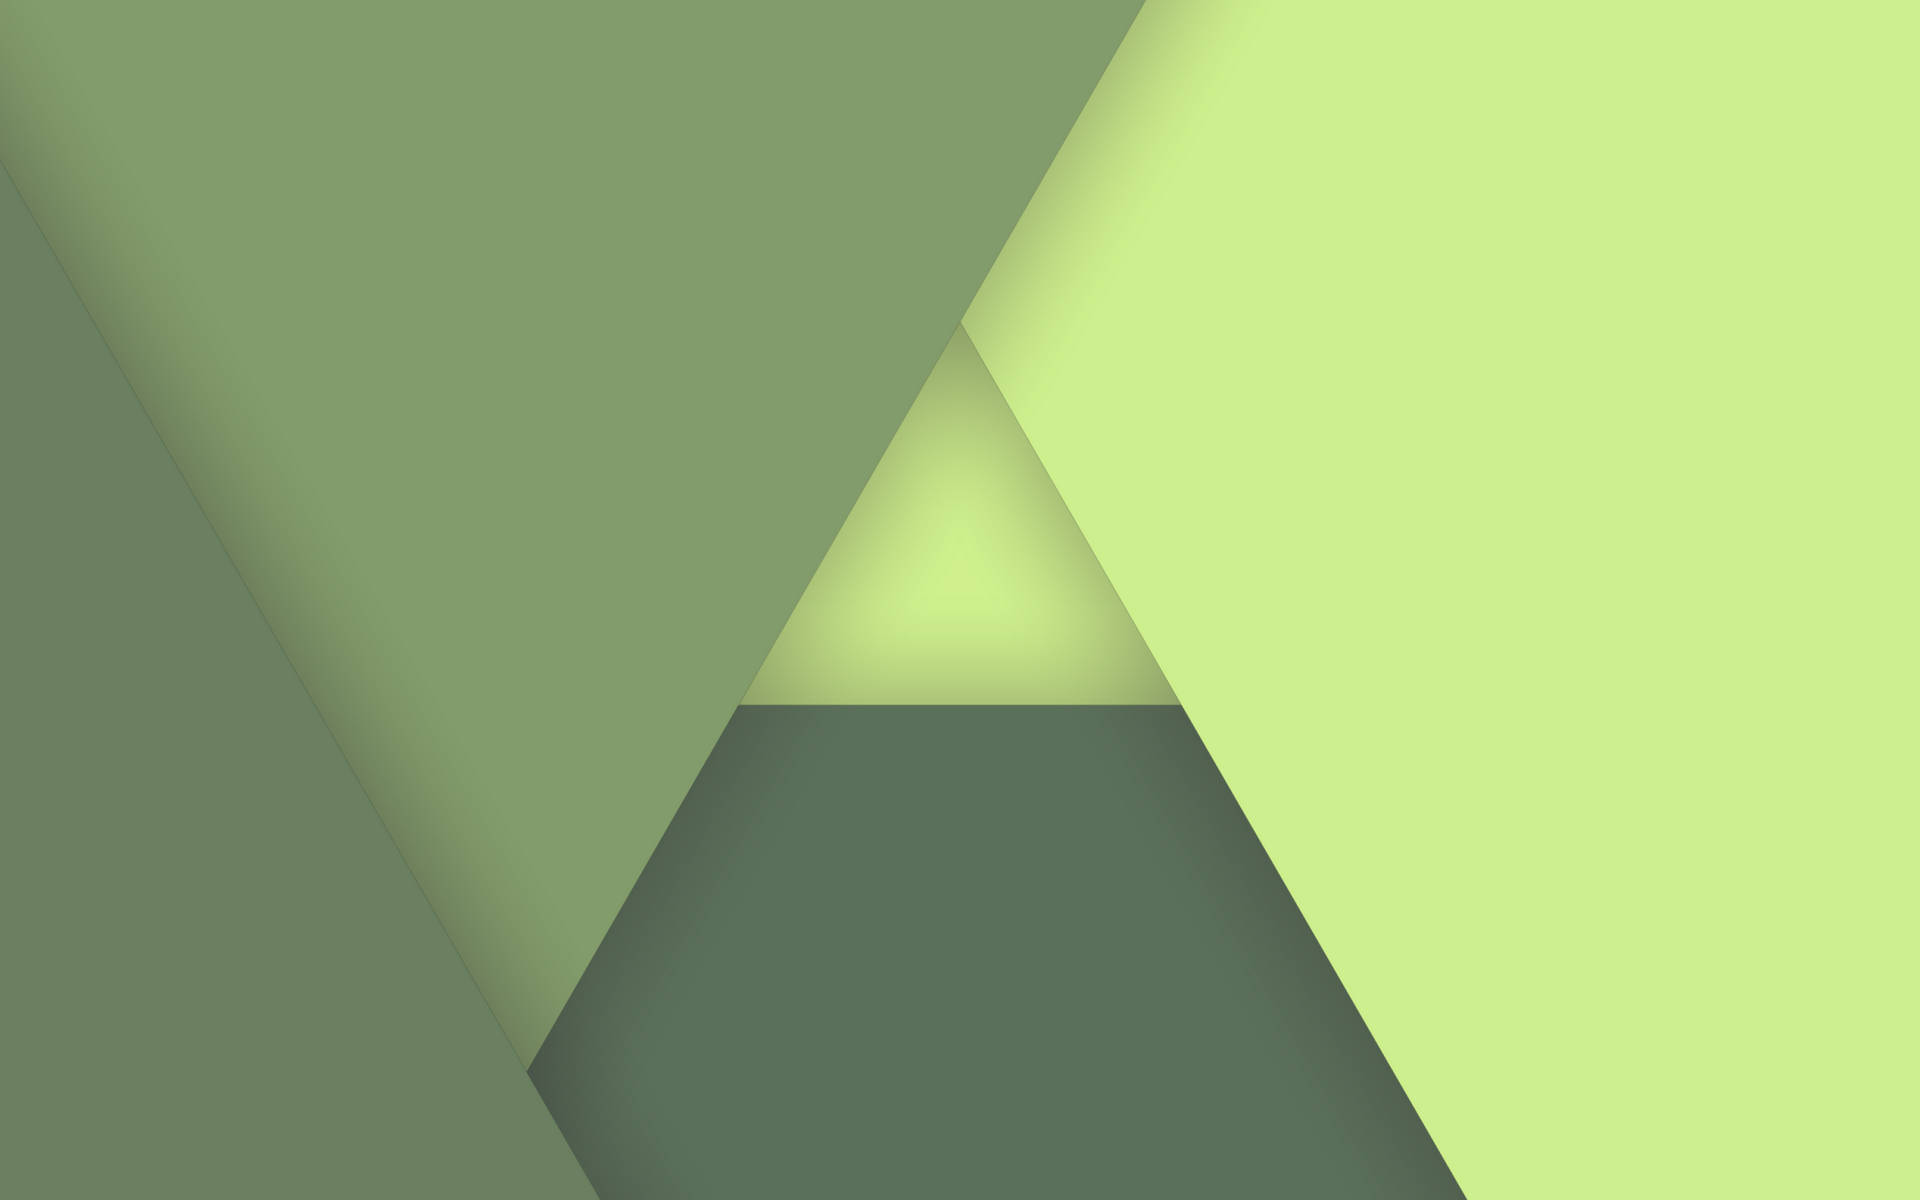 Static Green Triangles